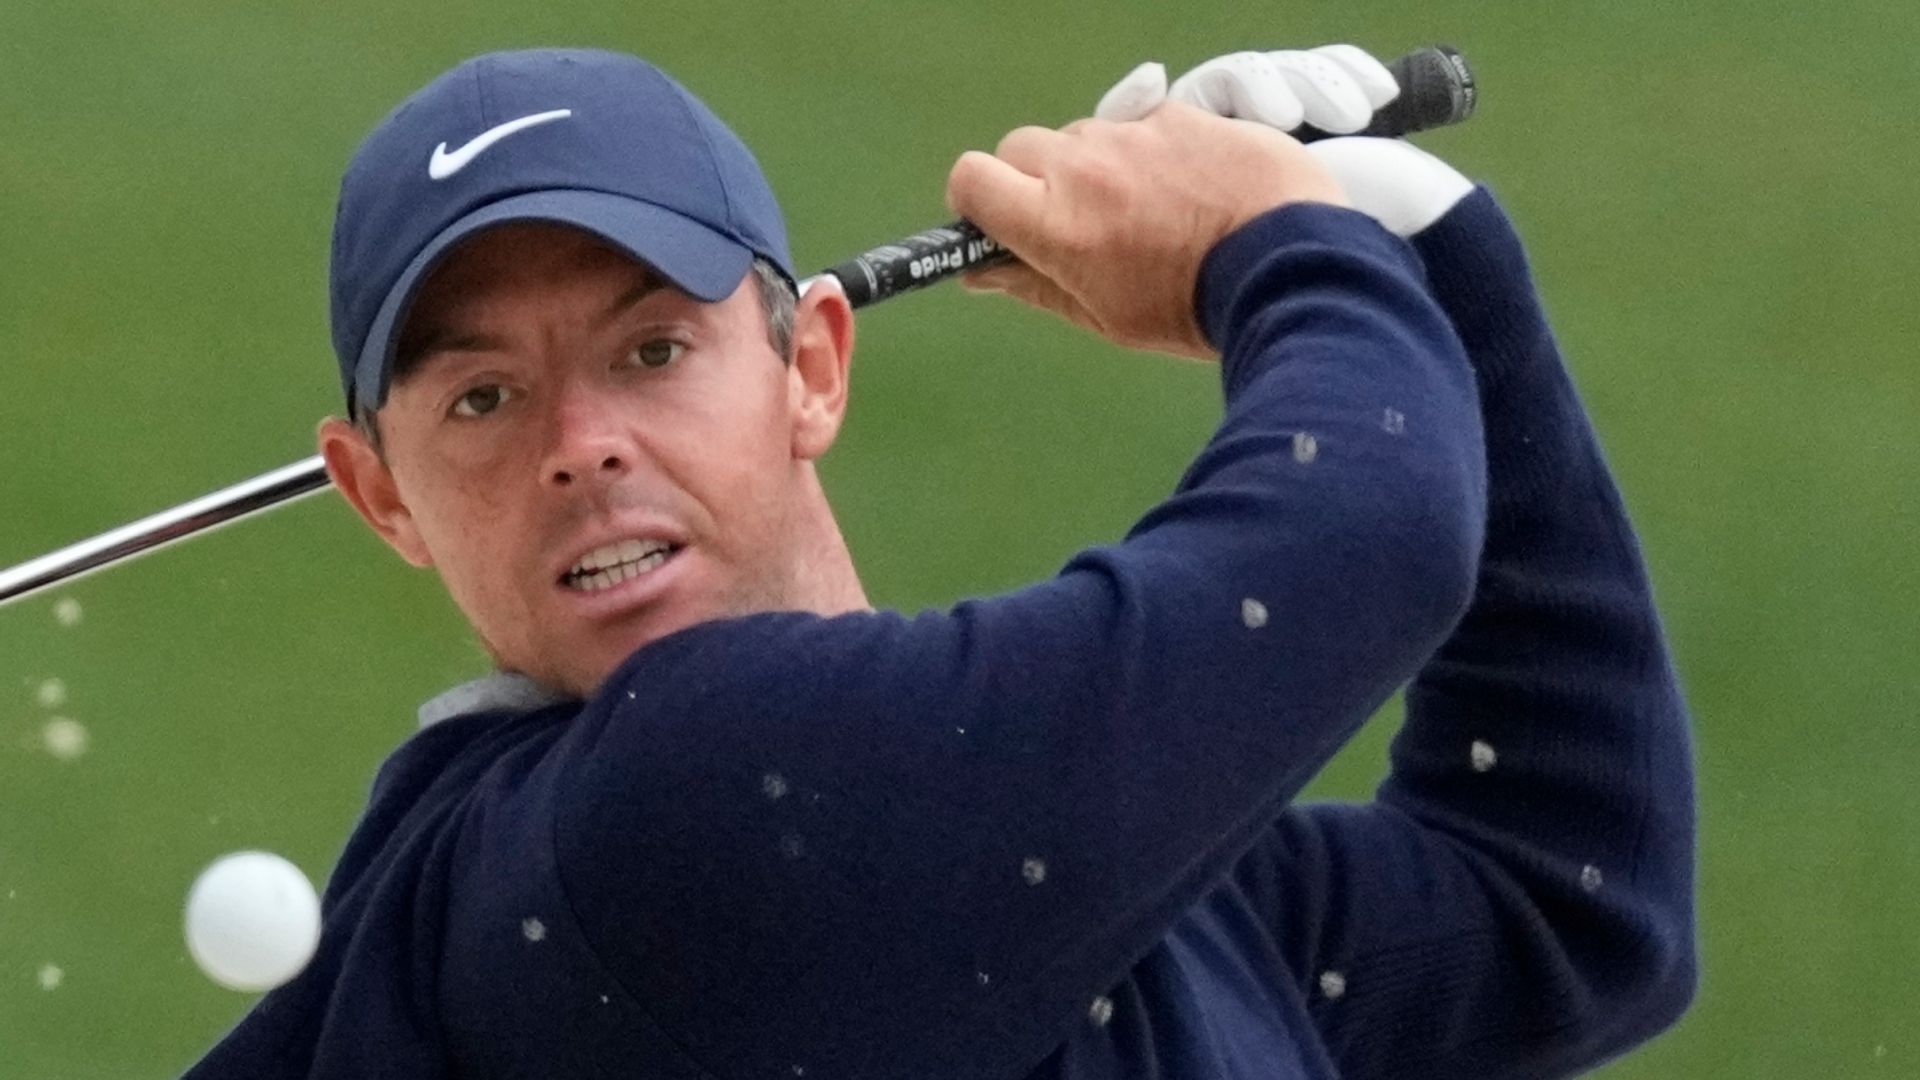 McIlroy sheds Augusta 'scar tissue' | 'Relaxed as ever' for The Masters